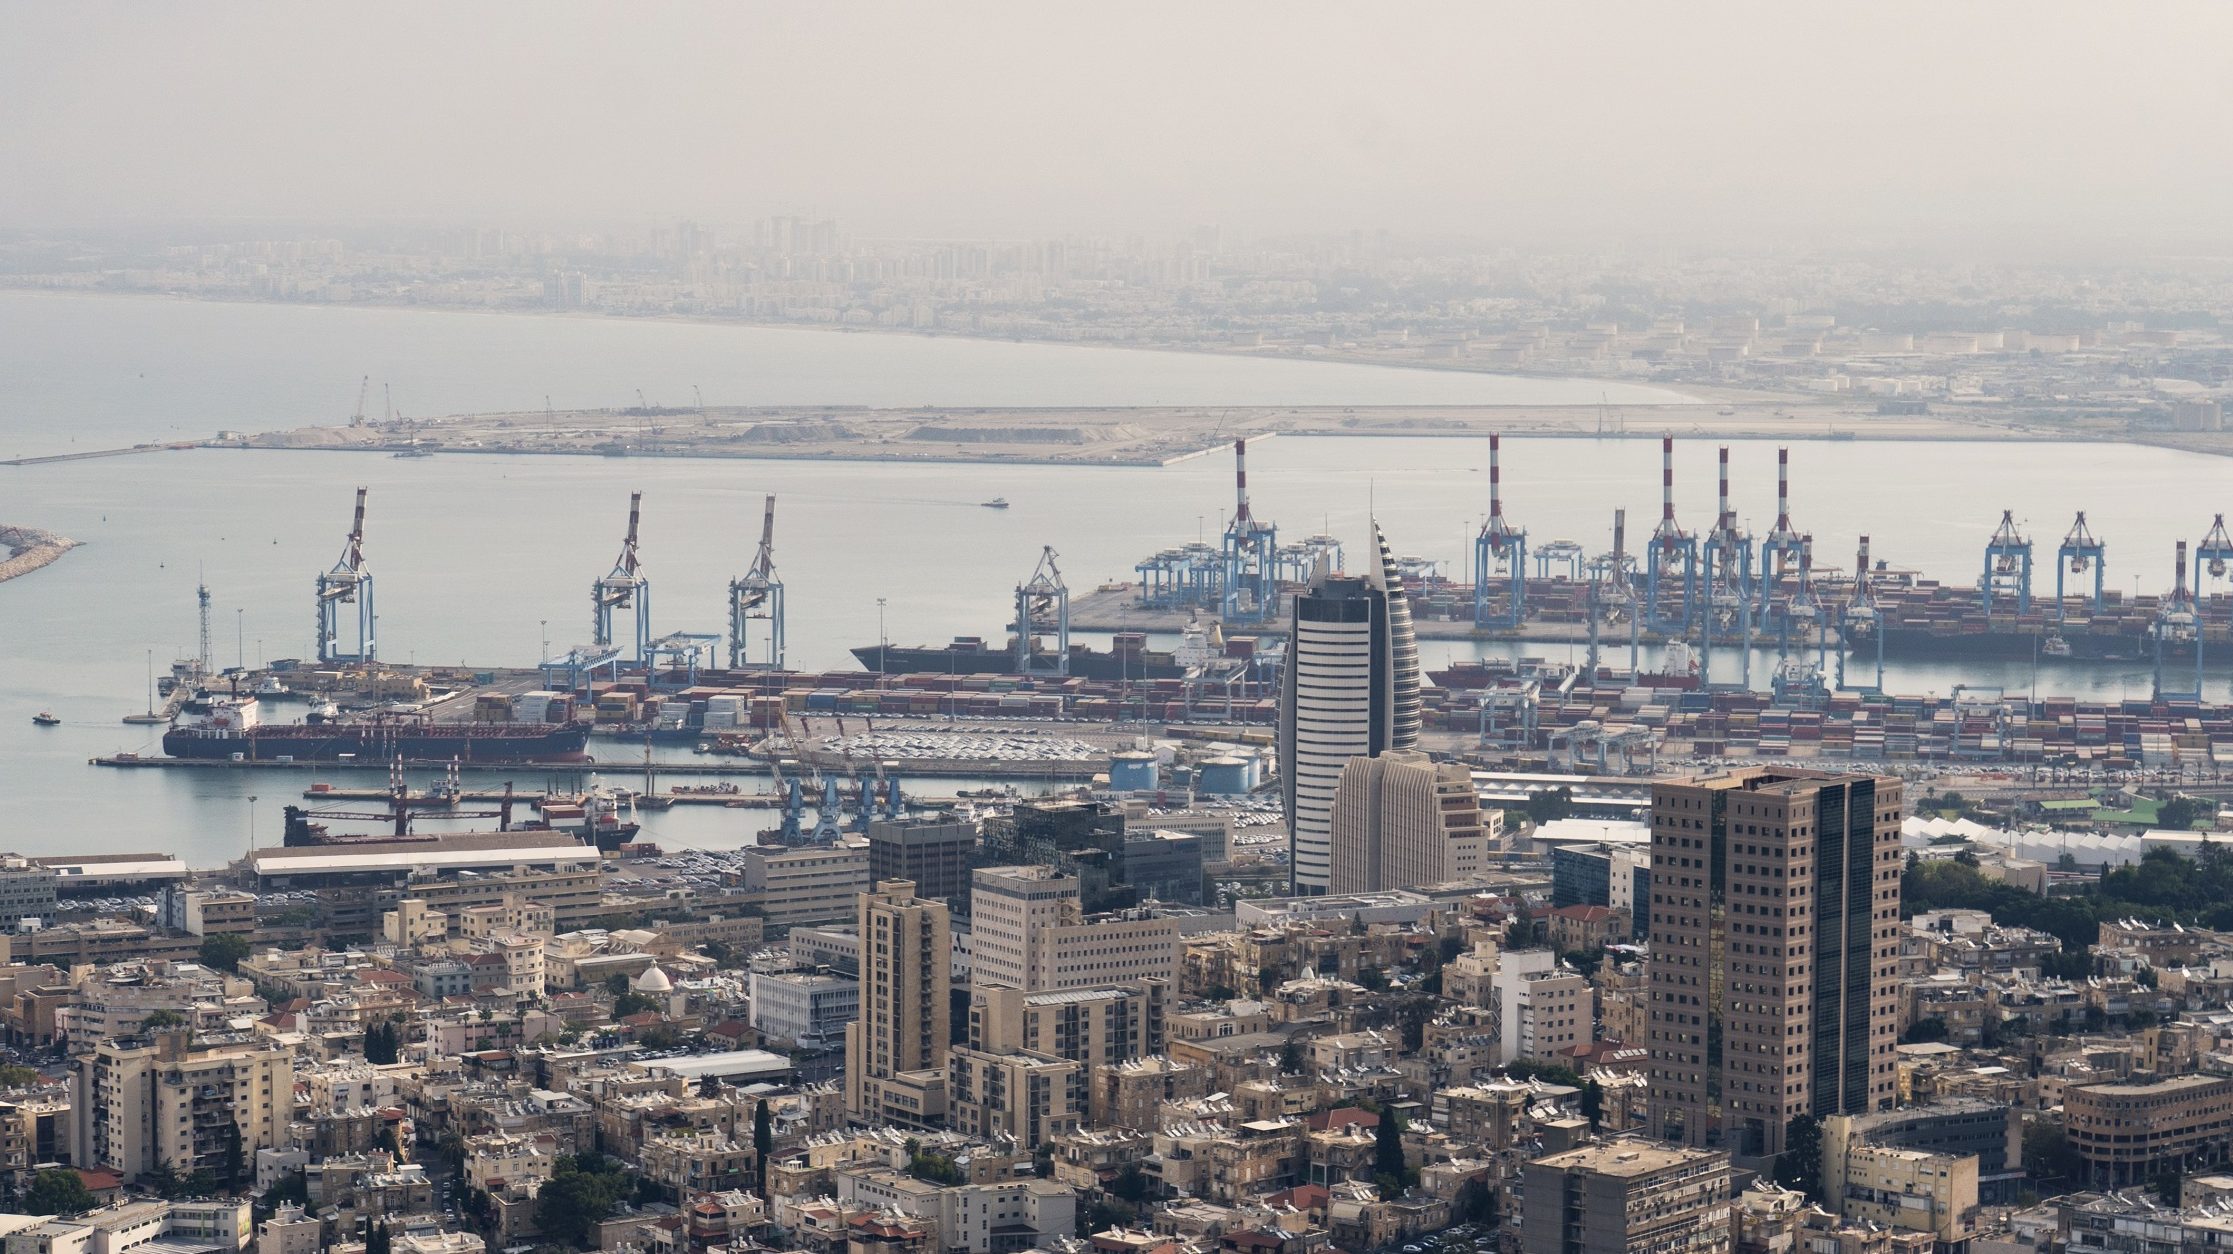 Cargo Ships Carrying Grain Given Unloading Priority in Israeli Ports